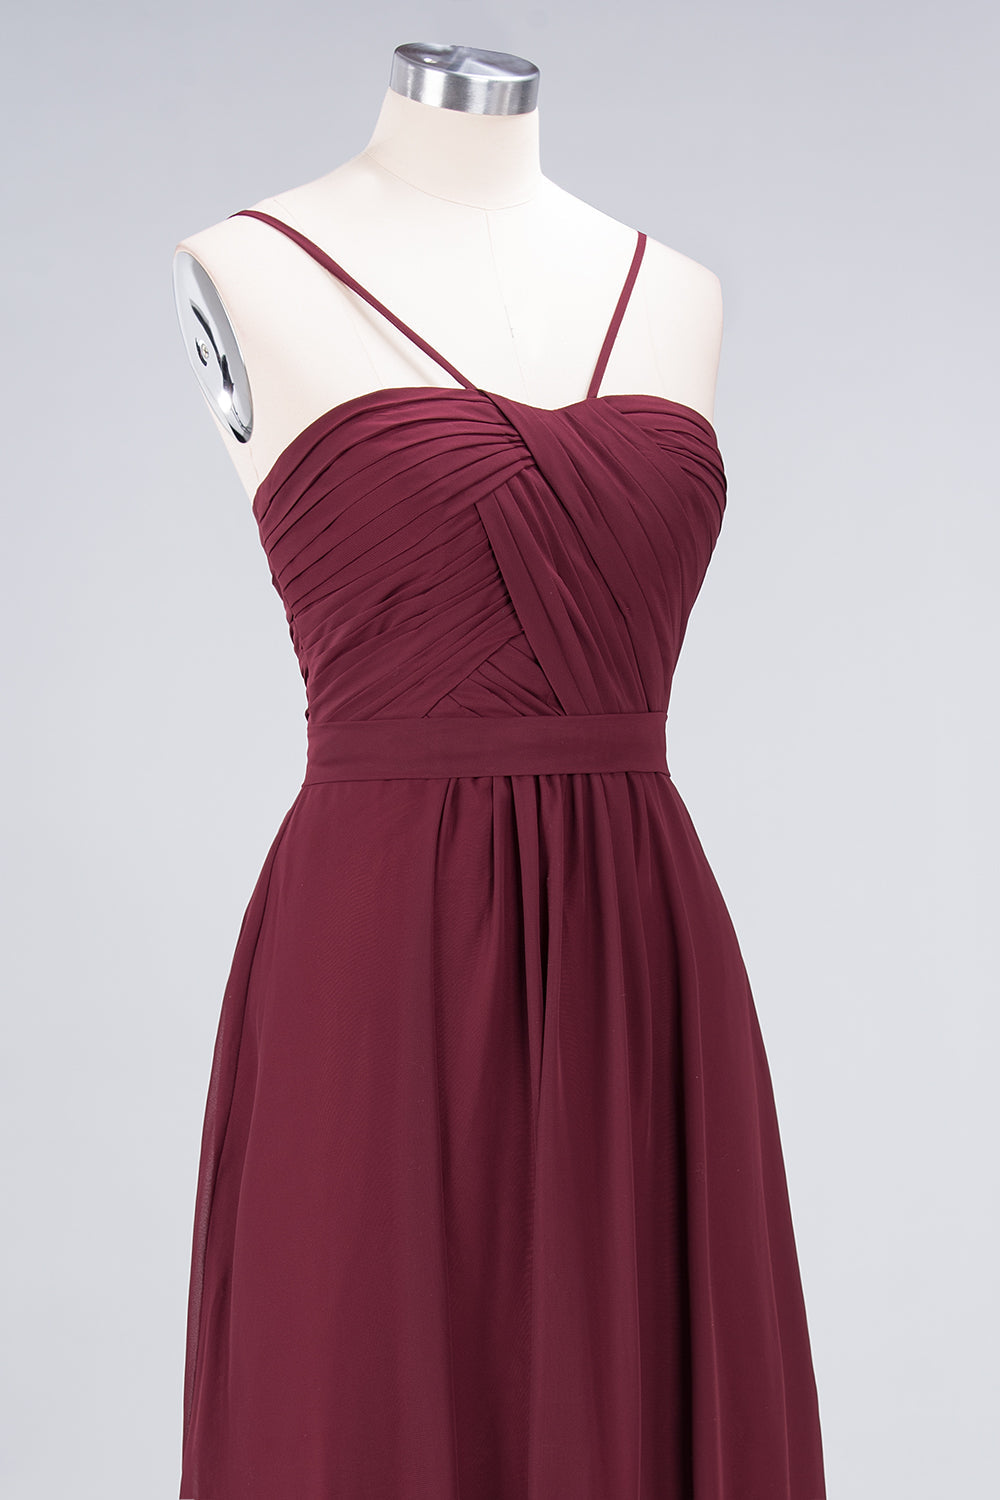 Chic Burgundy Sweetheart Long Bridesmaid Dress With Spaghetti-Straps